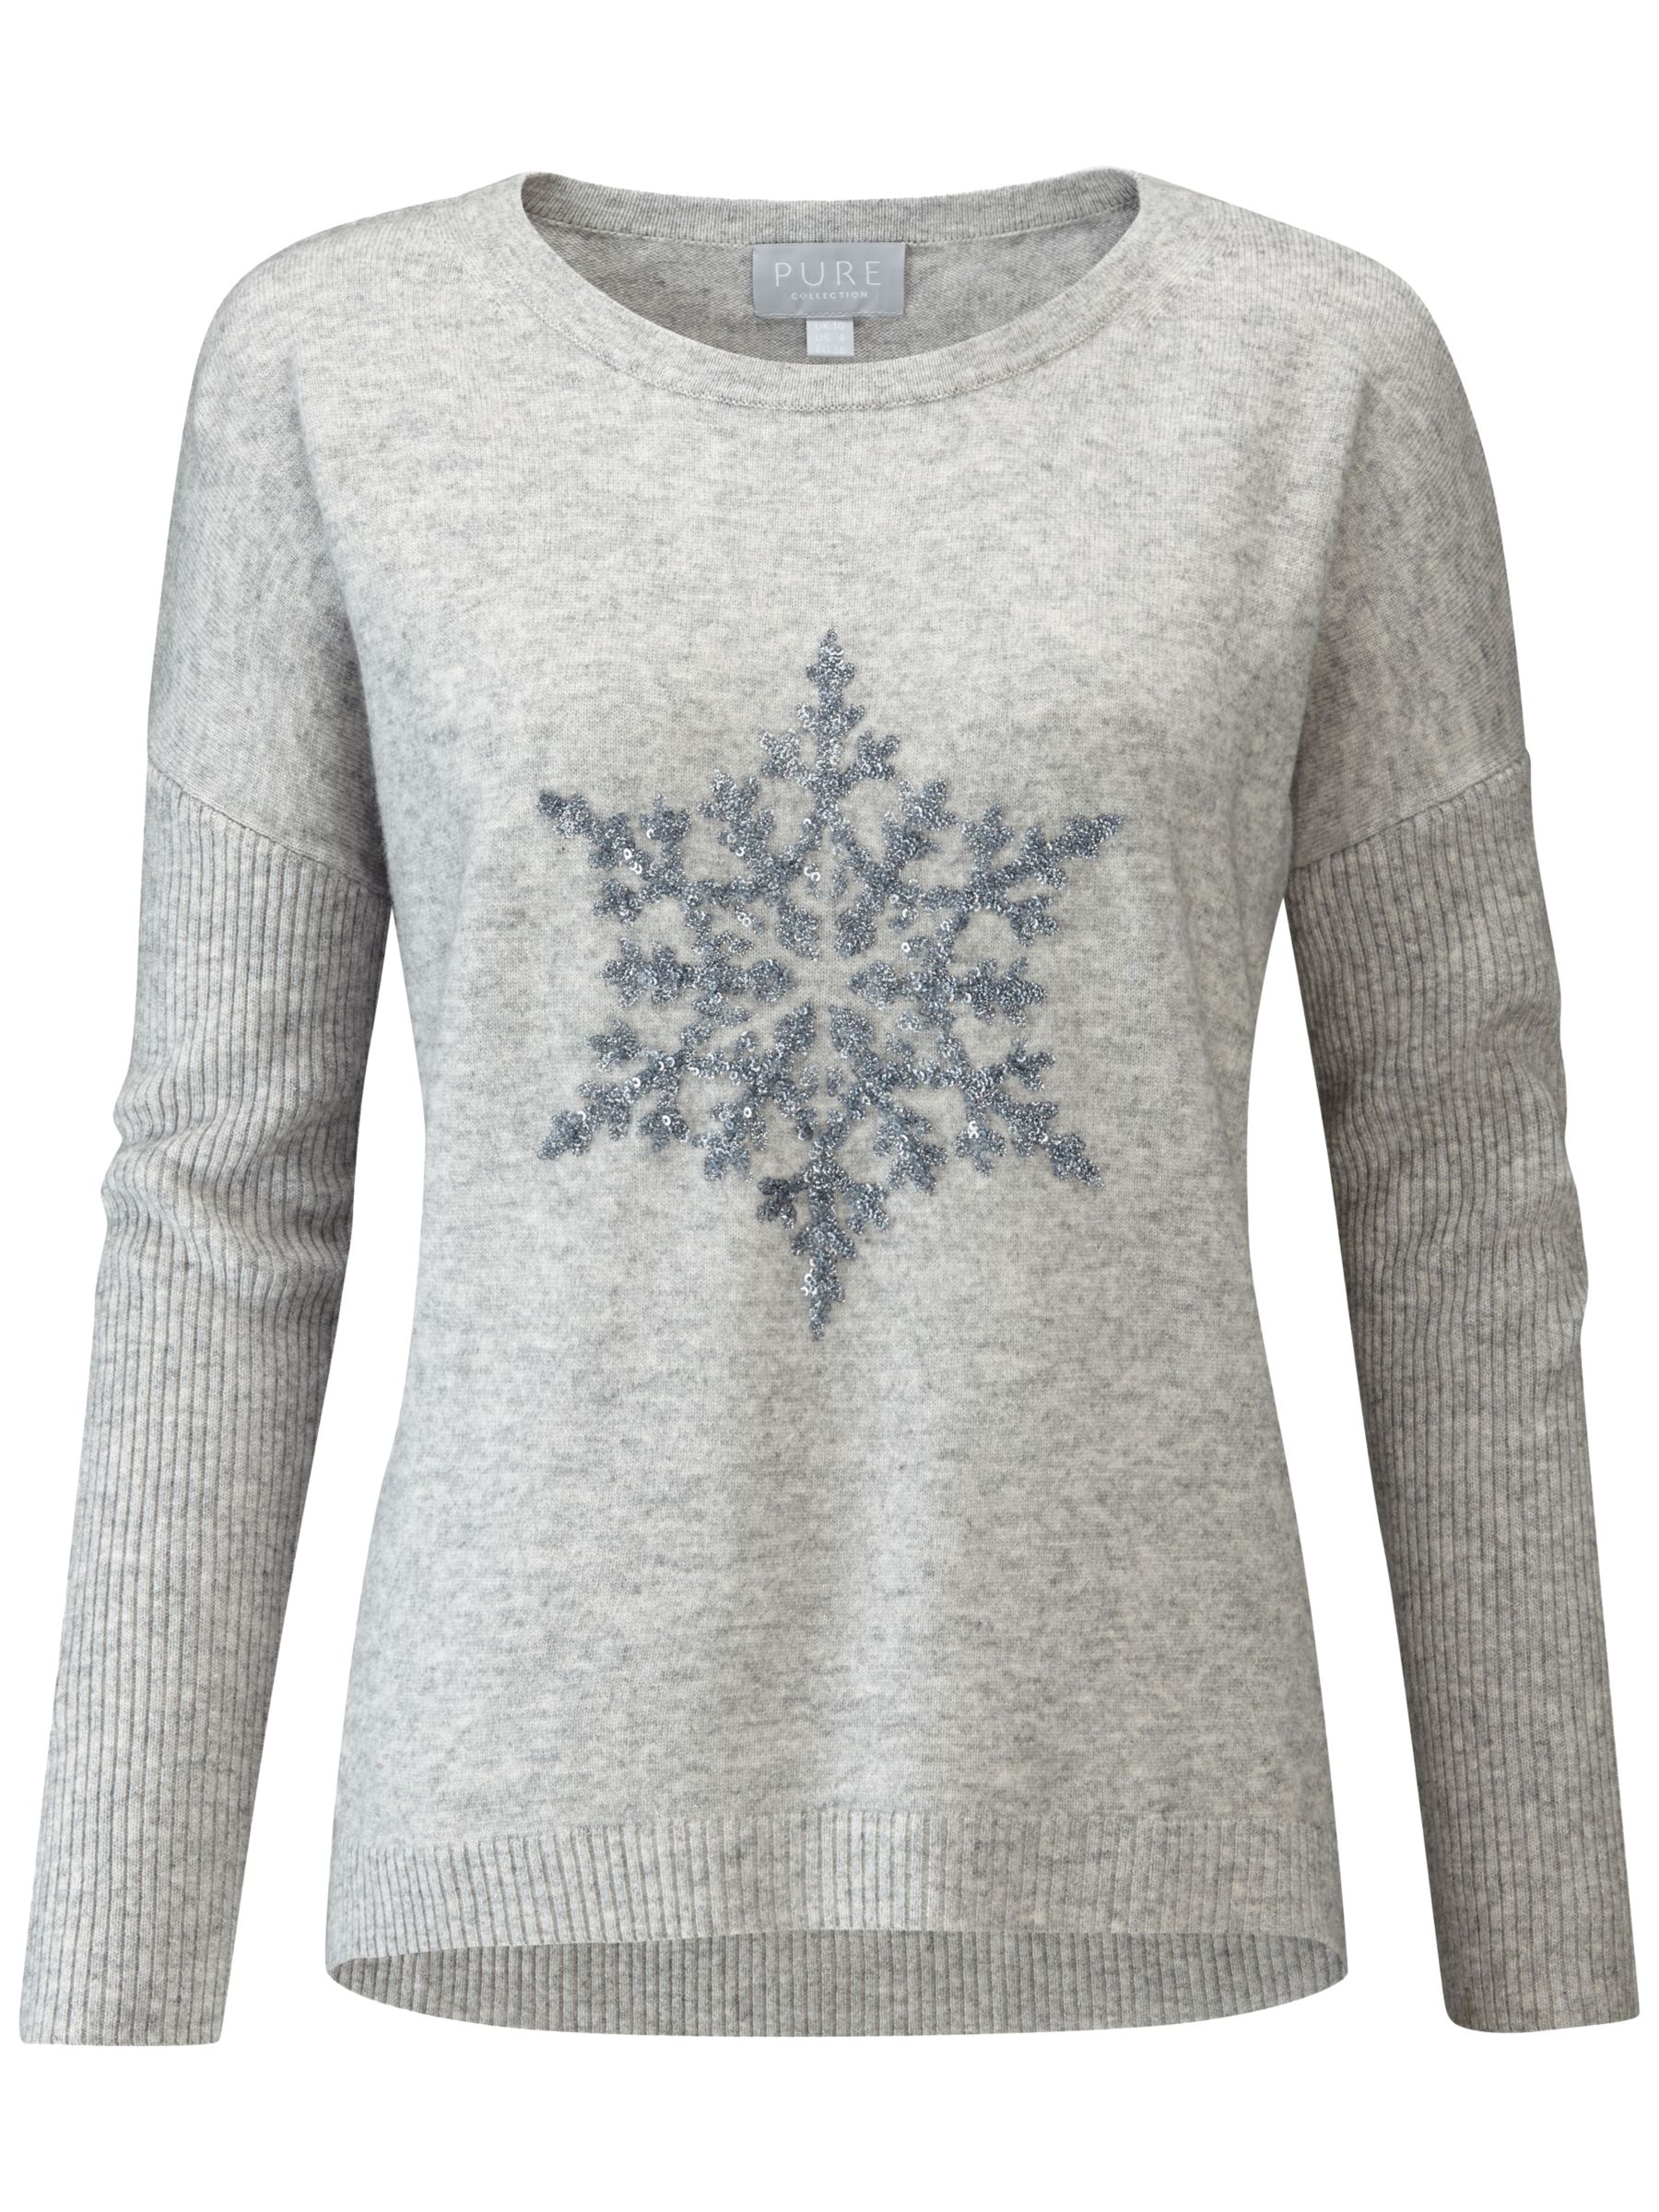 Pure Collection Sparkle Snowflake Dipped Hem Jumper, Grey, 8